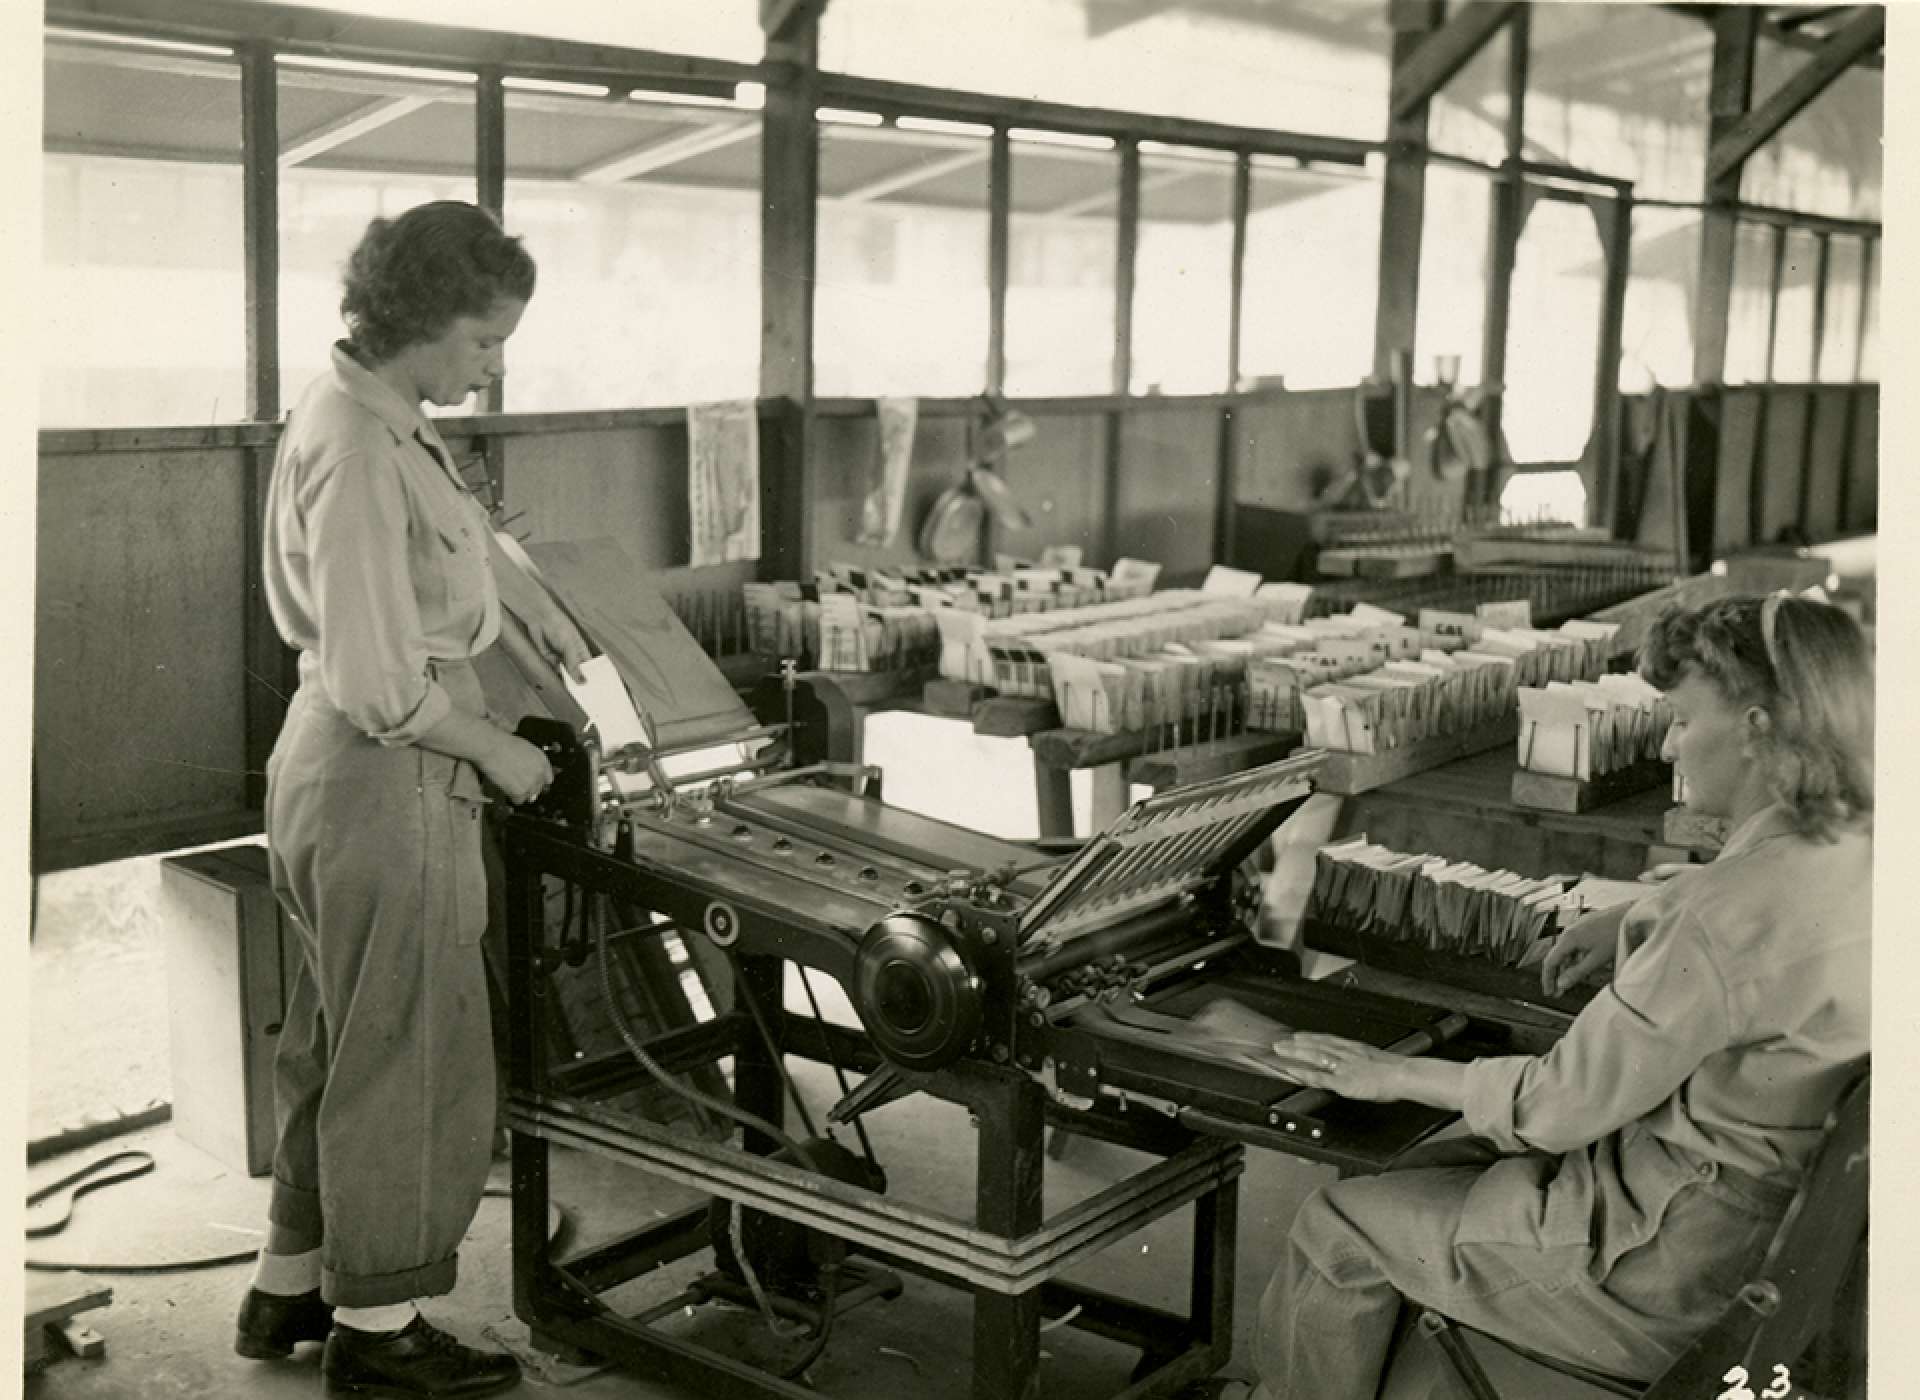 V-mail operation in the field at APO 929. “On this machine the letters are folded to correct size for insertion into V-Mail envelops, an operation which requires about eight minutes per roll. In the background are racks of folded letters.&quot;